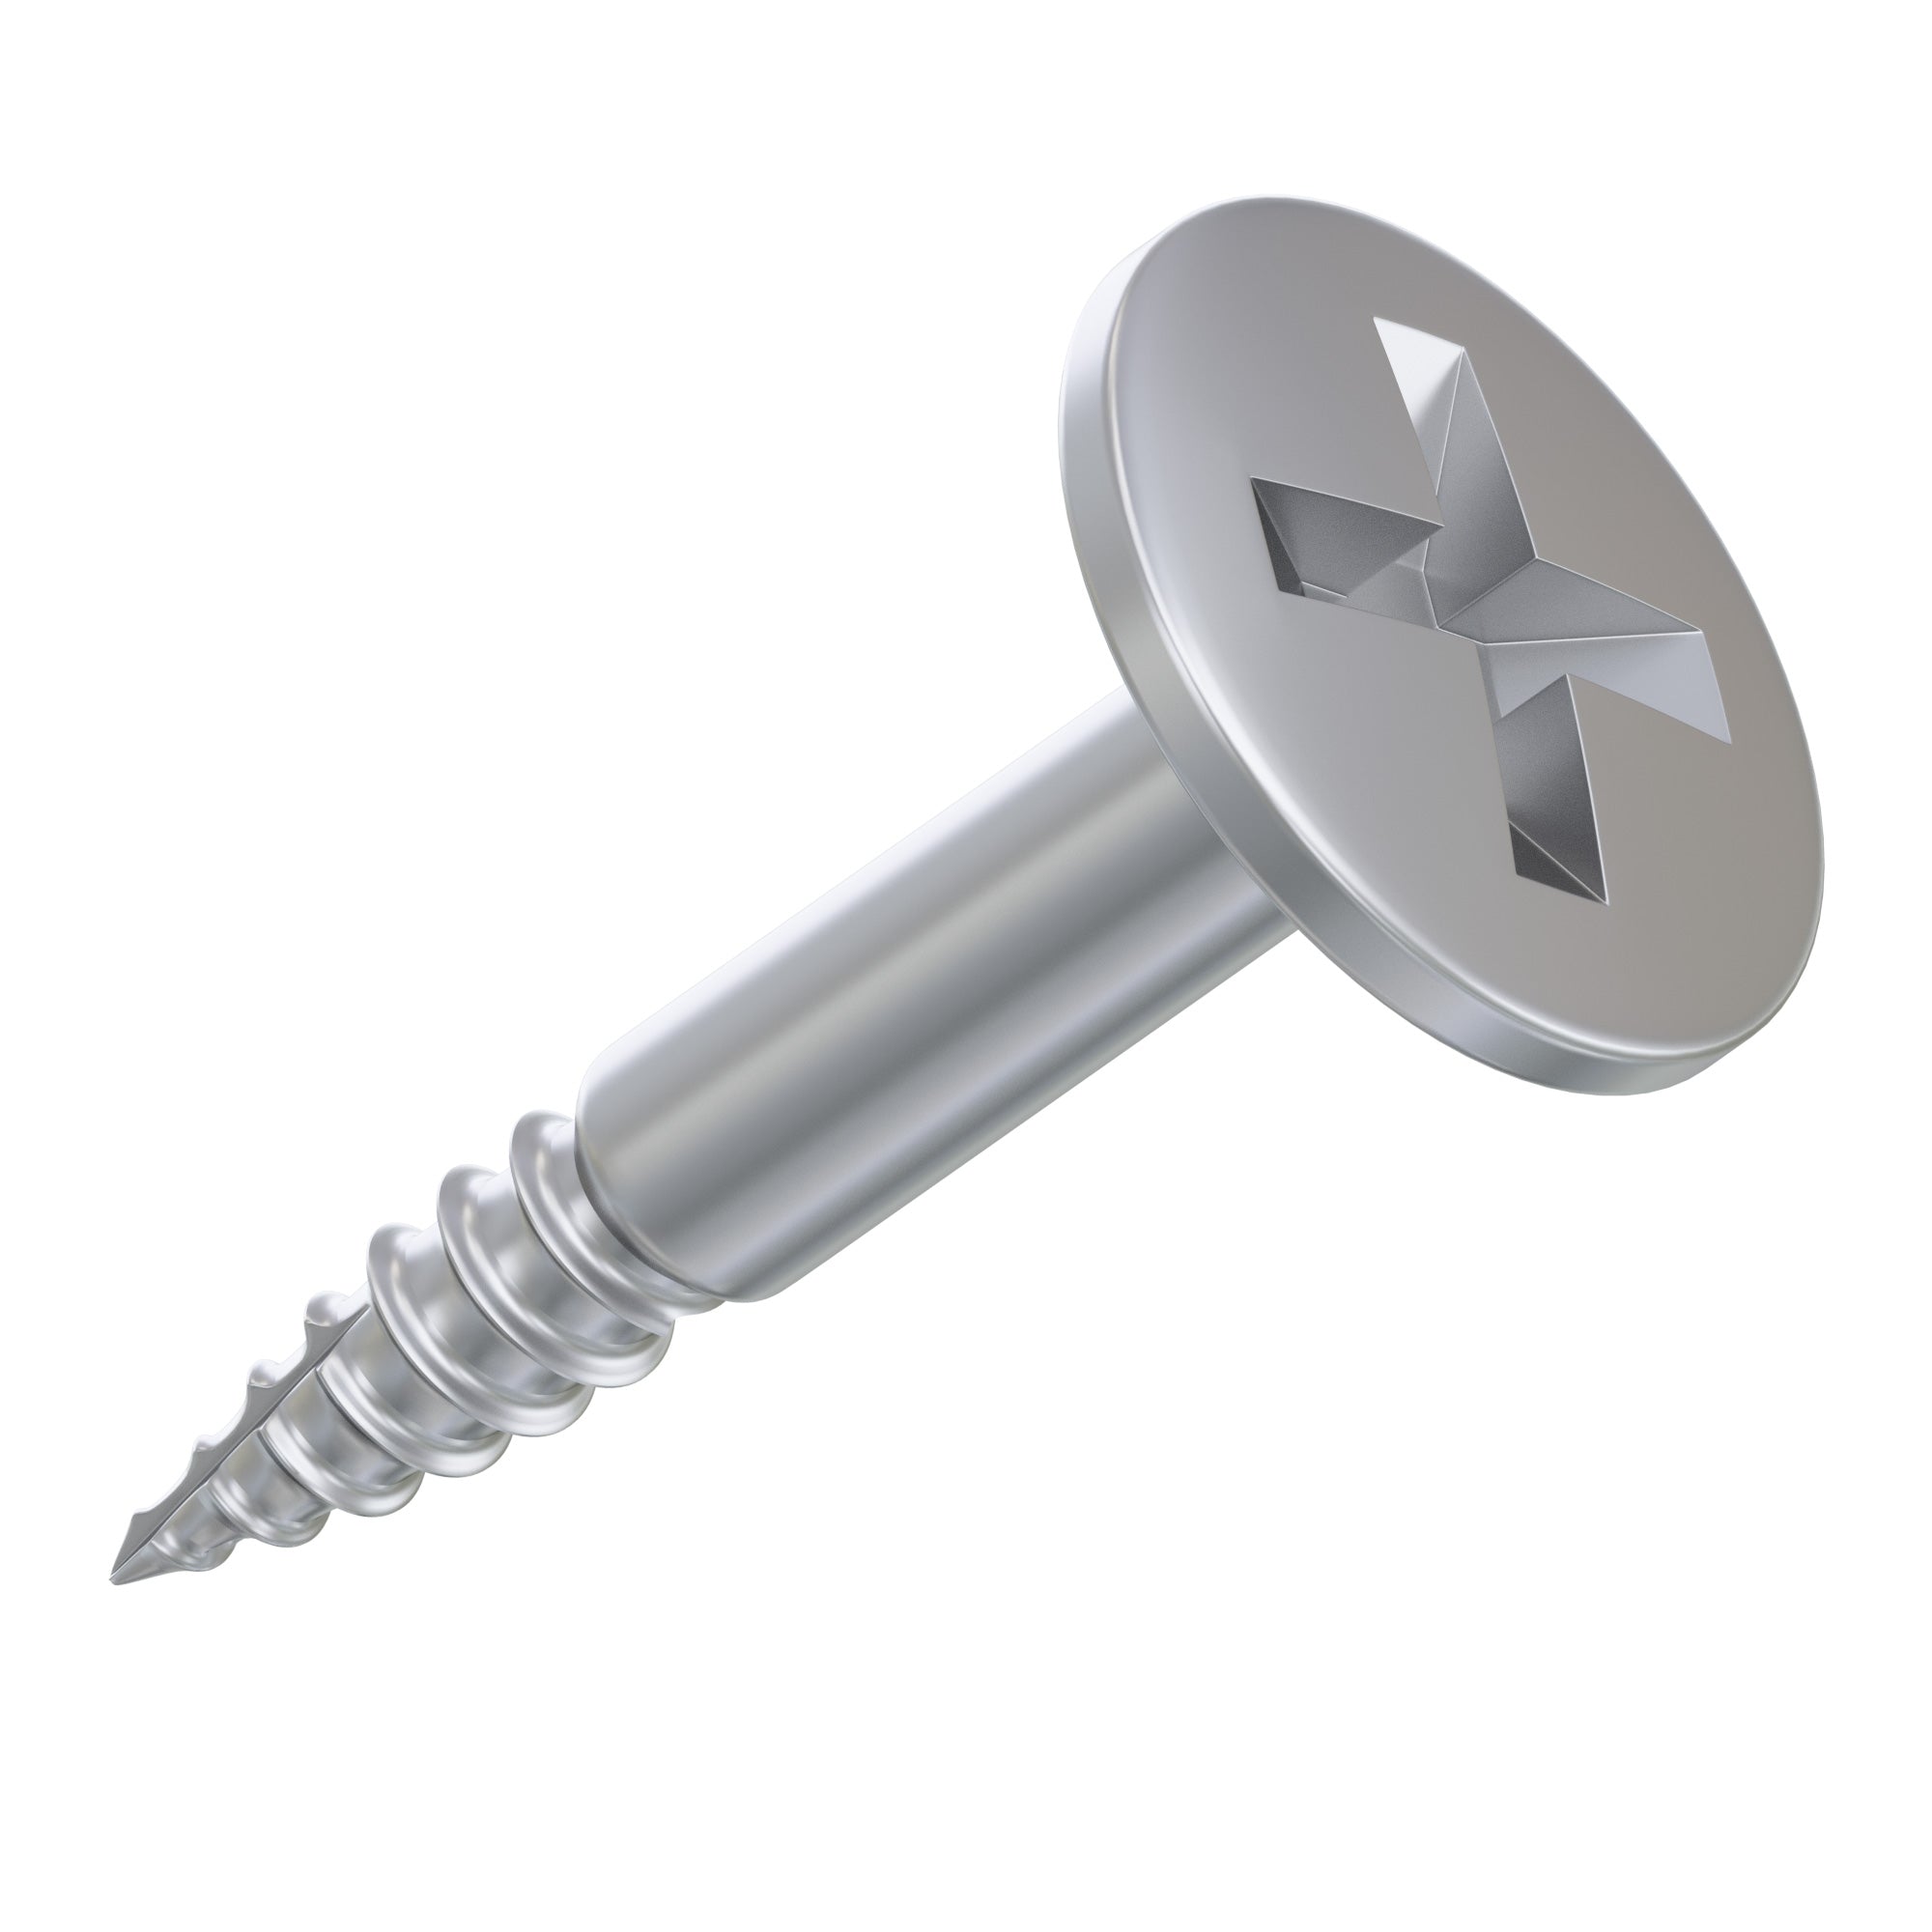 DSI Surgical Half-Thread Tenting Screw For Membrane Fixation Ø1.5mm